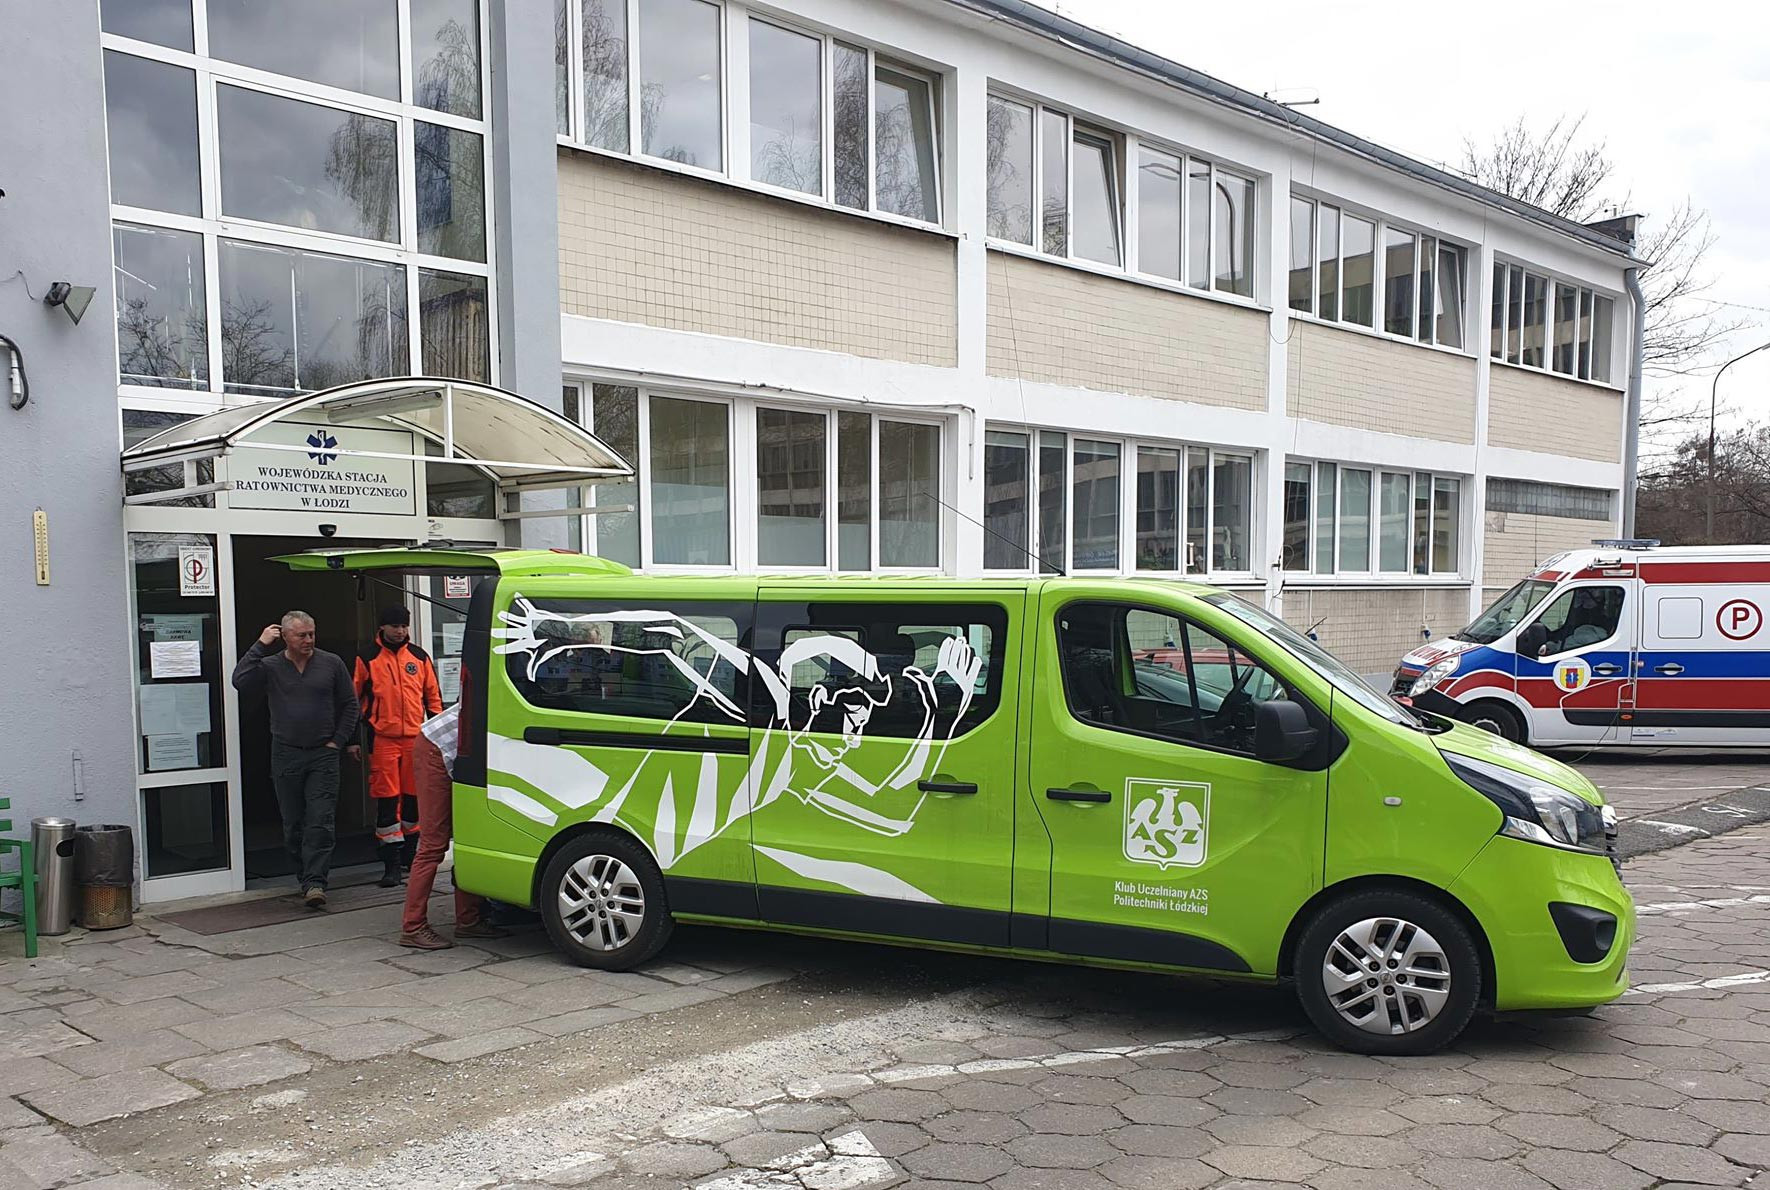 The team bus of the AZS Sports Club at Lodz Technical University is among the vehicles being used to help deliver the food supplies ©FISU